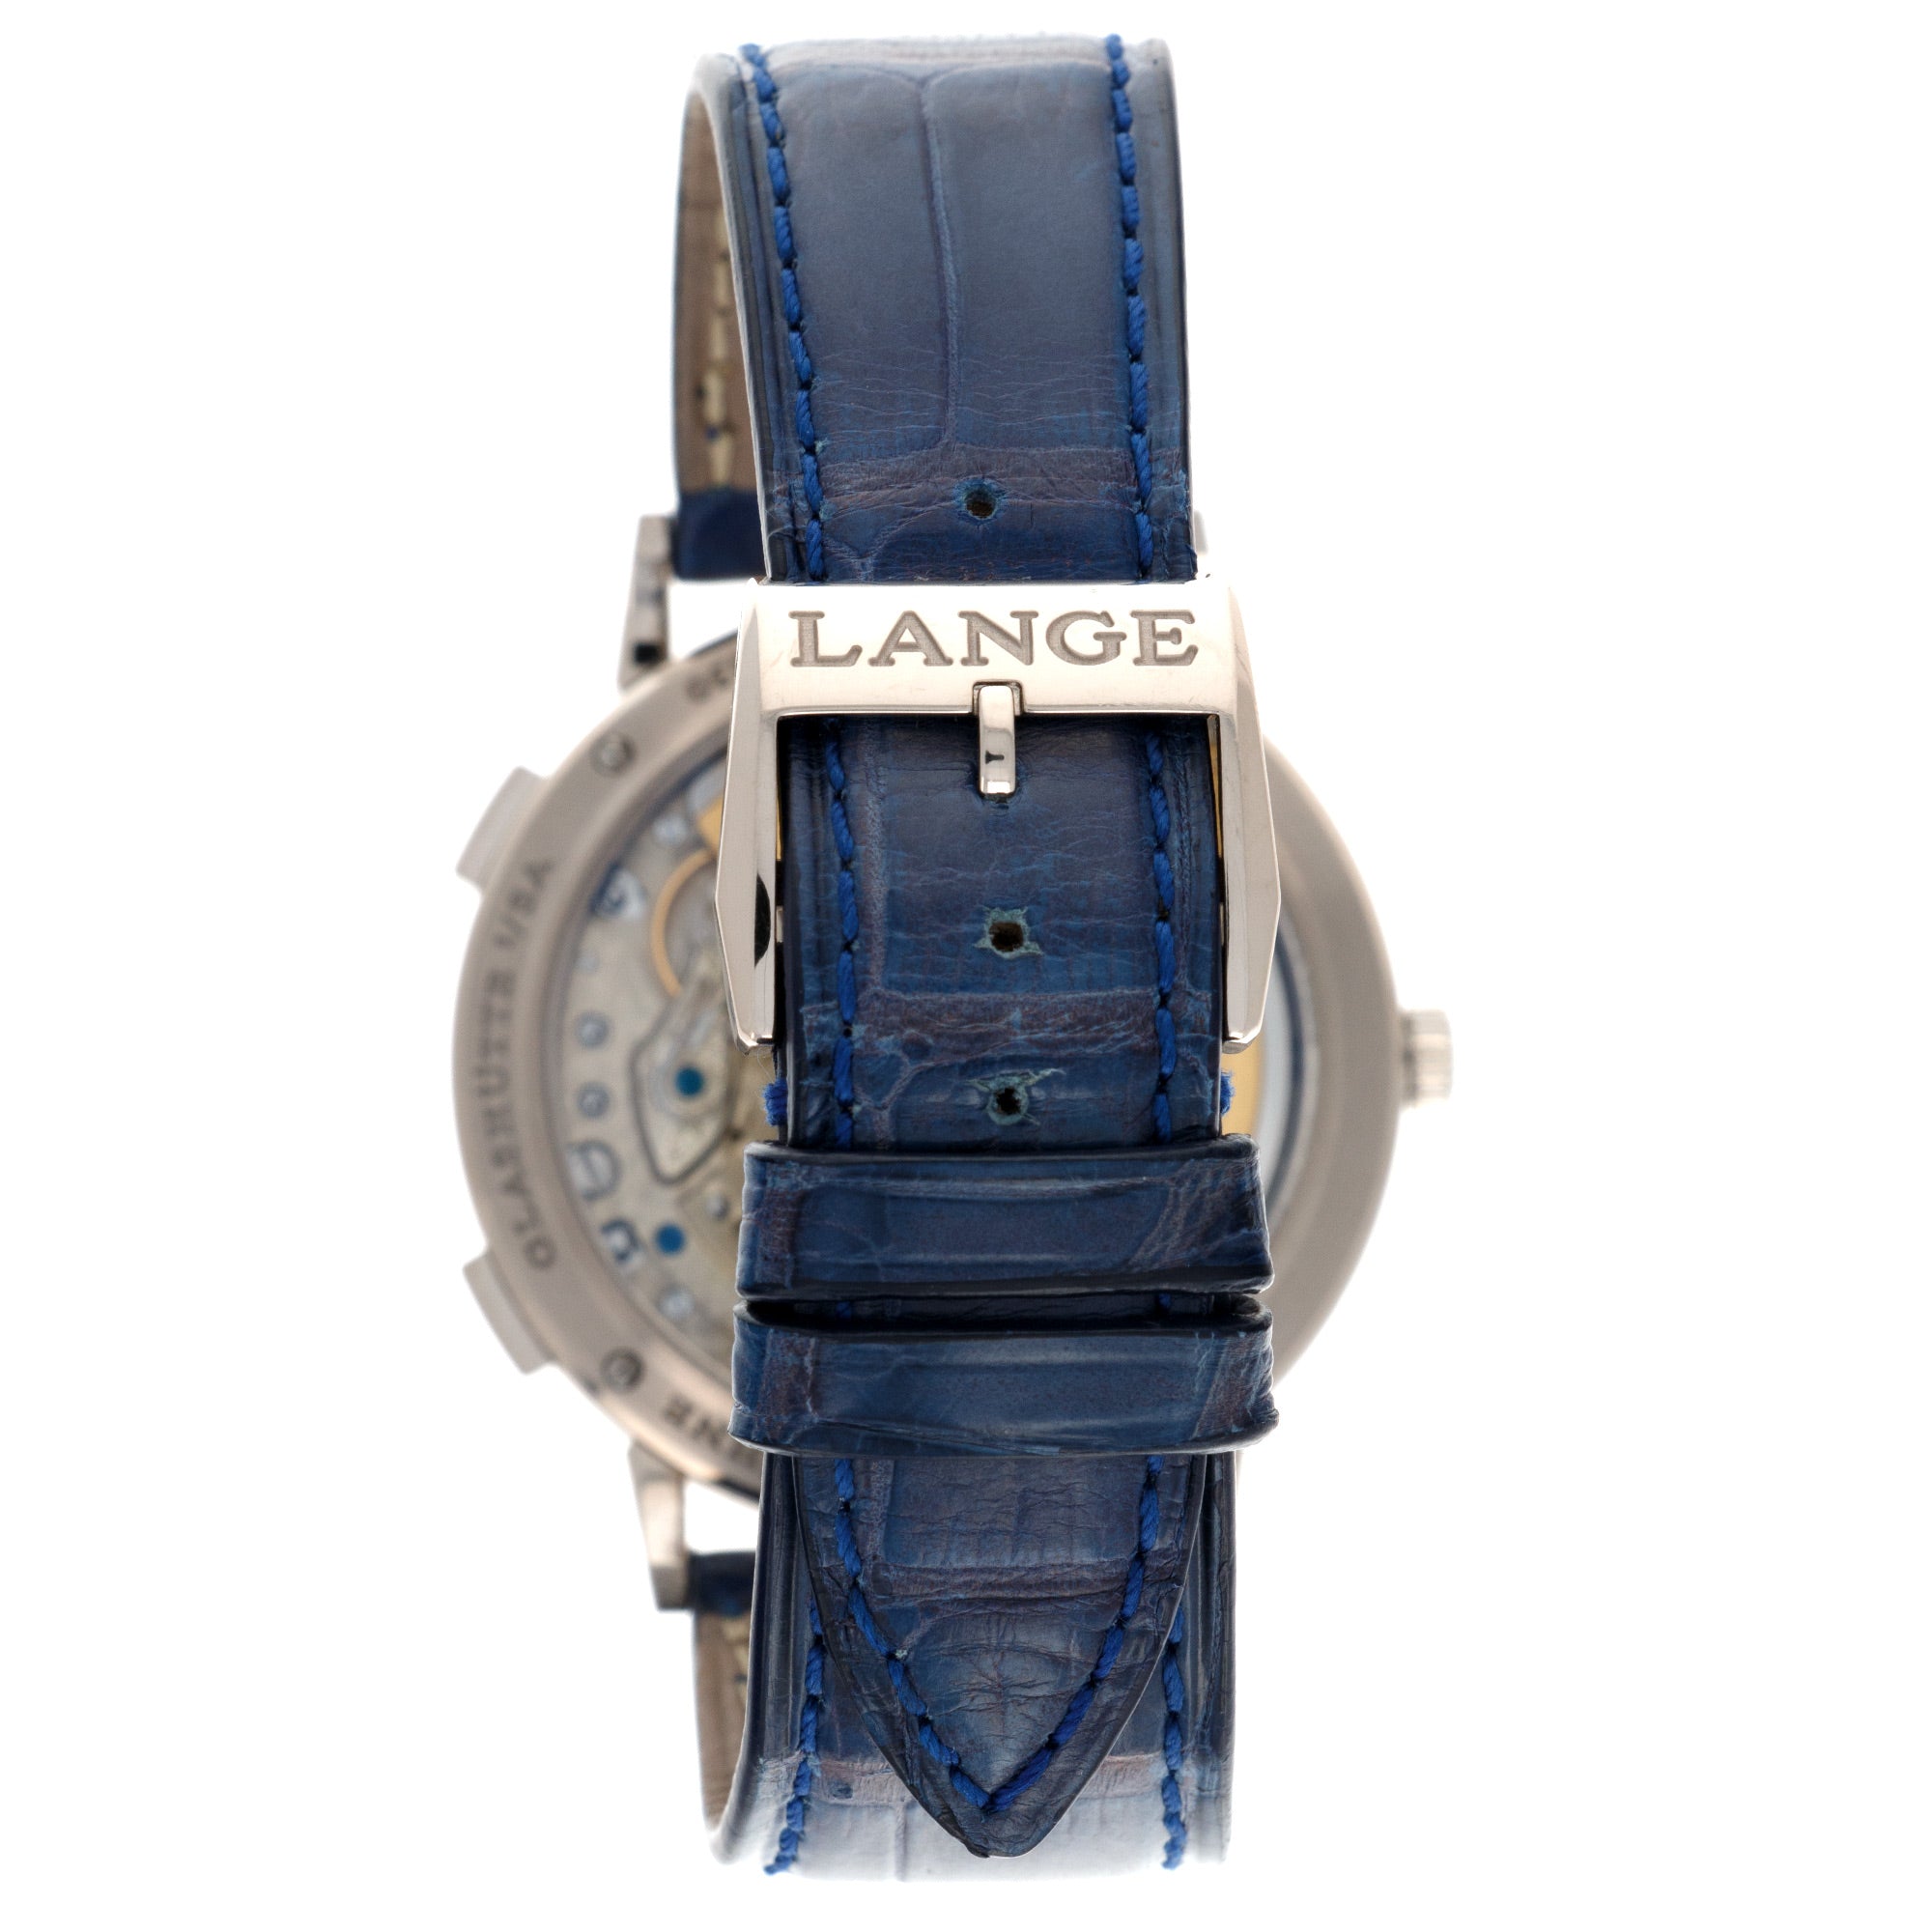 A. Lange &amp; Sohne - A. Lange &amp; Sohne White Gold Dual TIme Watch, Ref. 386.026 - The Keystone Watches